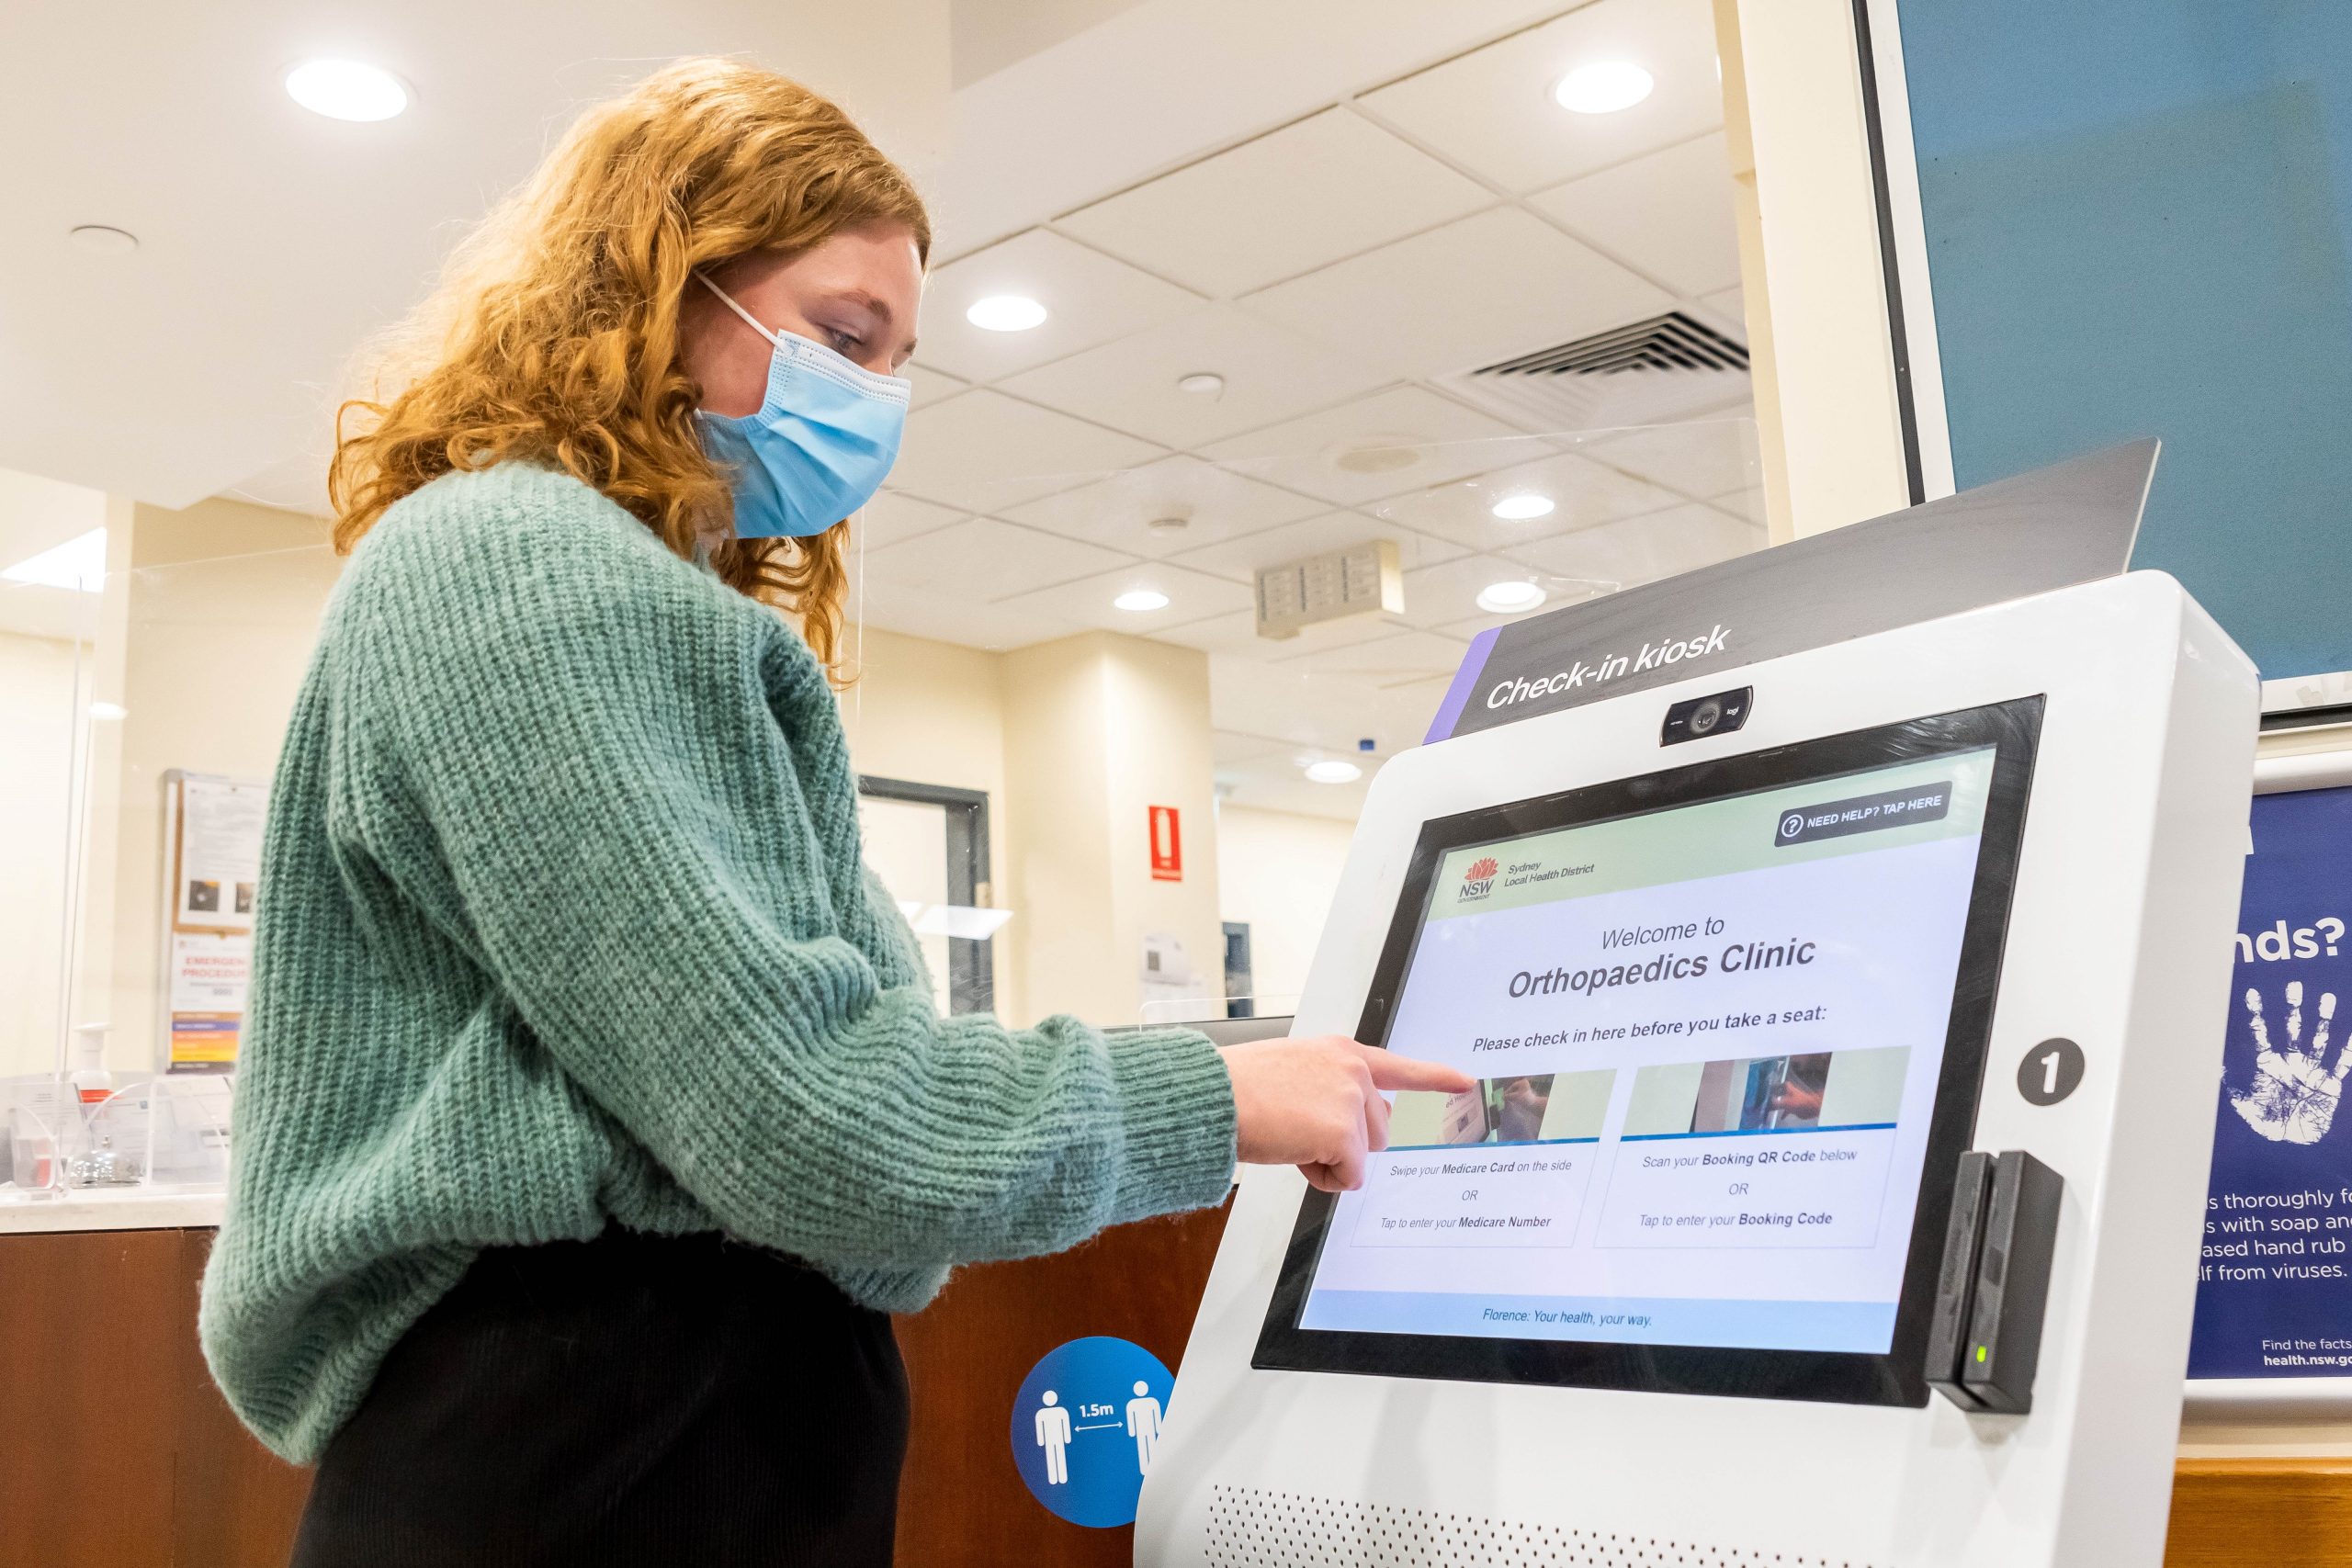 Young lady interacting with digital kiosk screen in hospital clinic